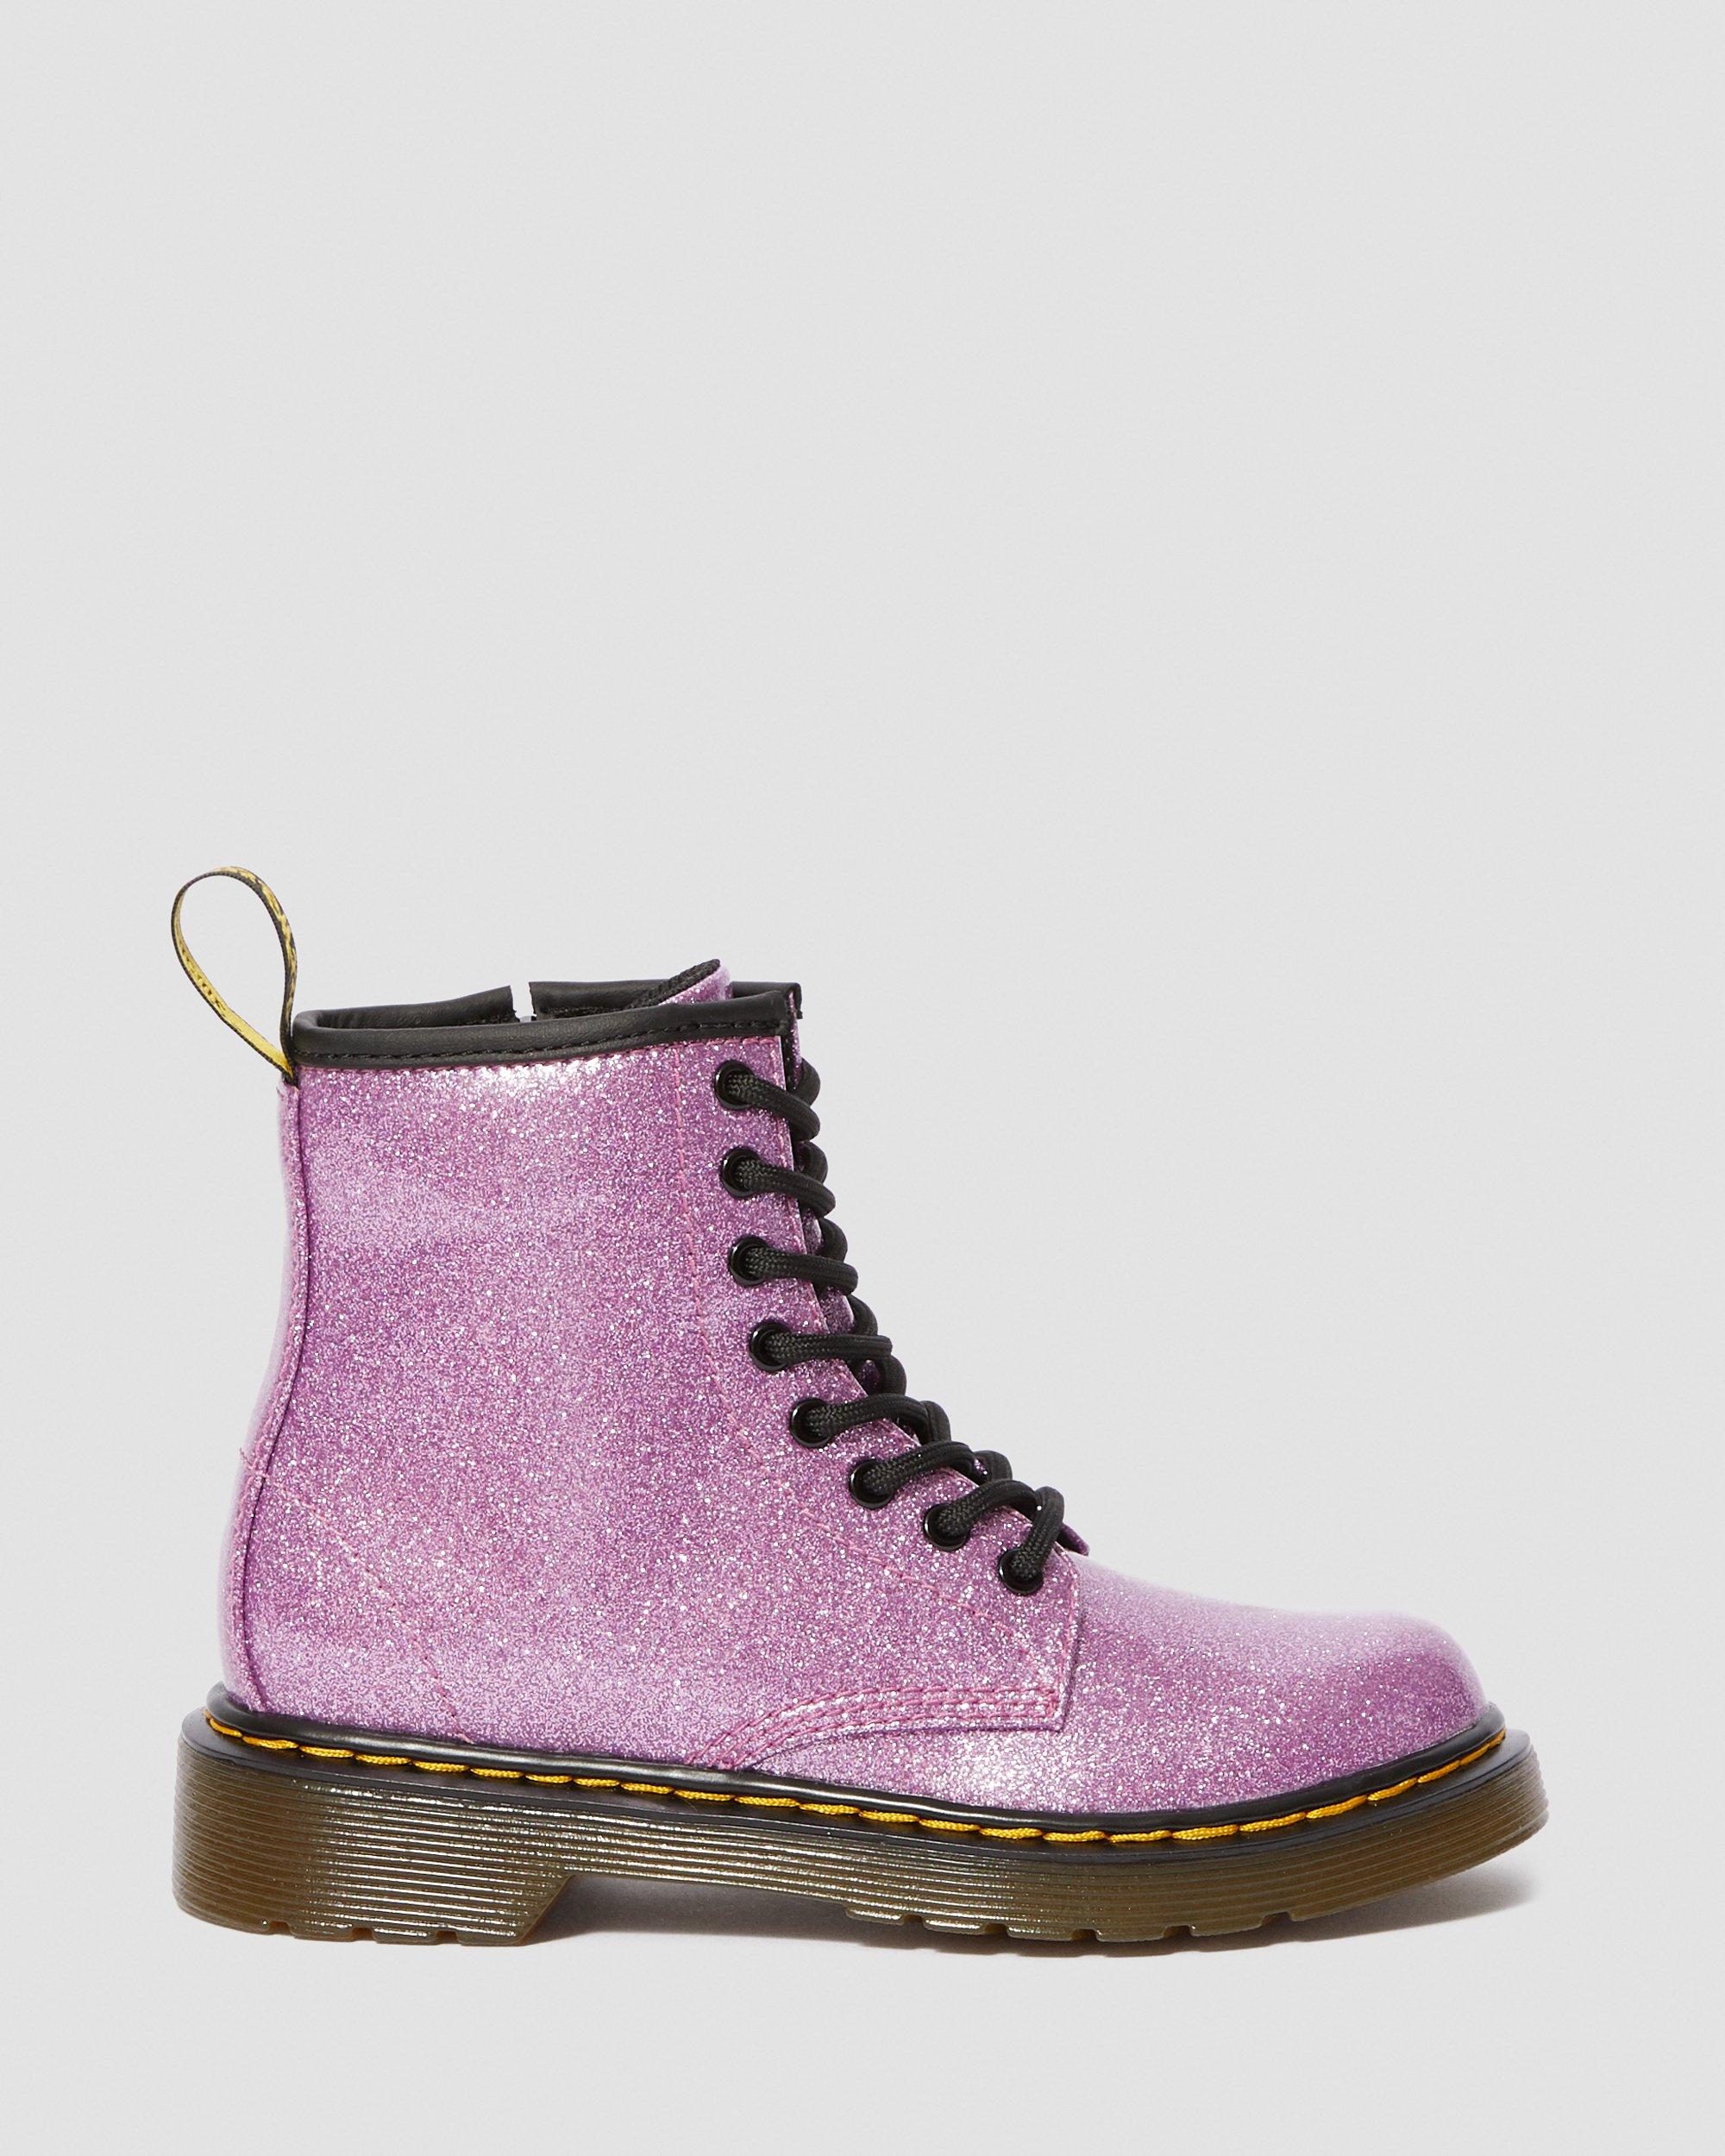 Junior 1460 Glitter Lace Up Boots in Dark Pink | Dr. Martens